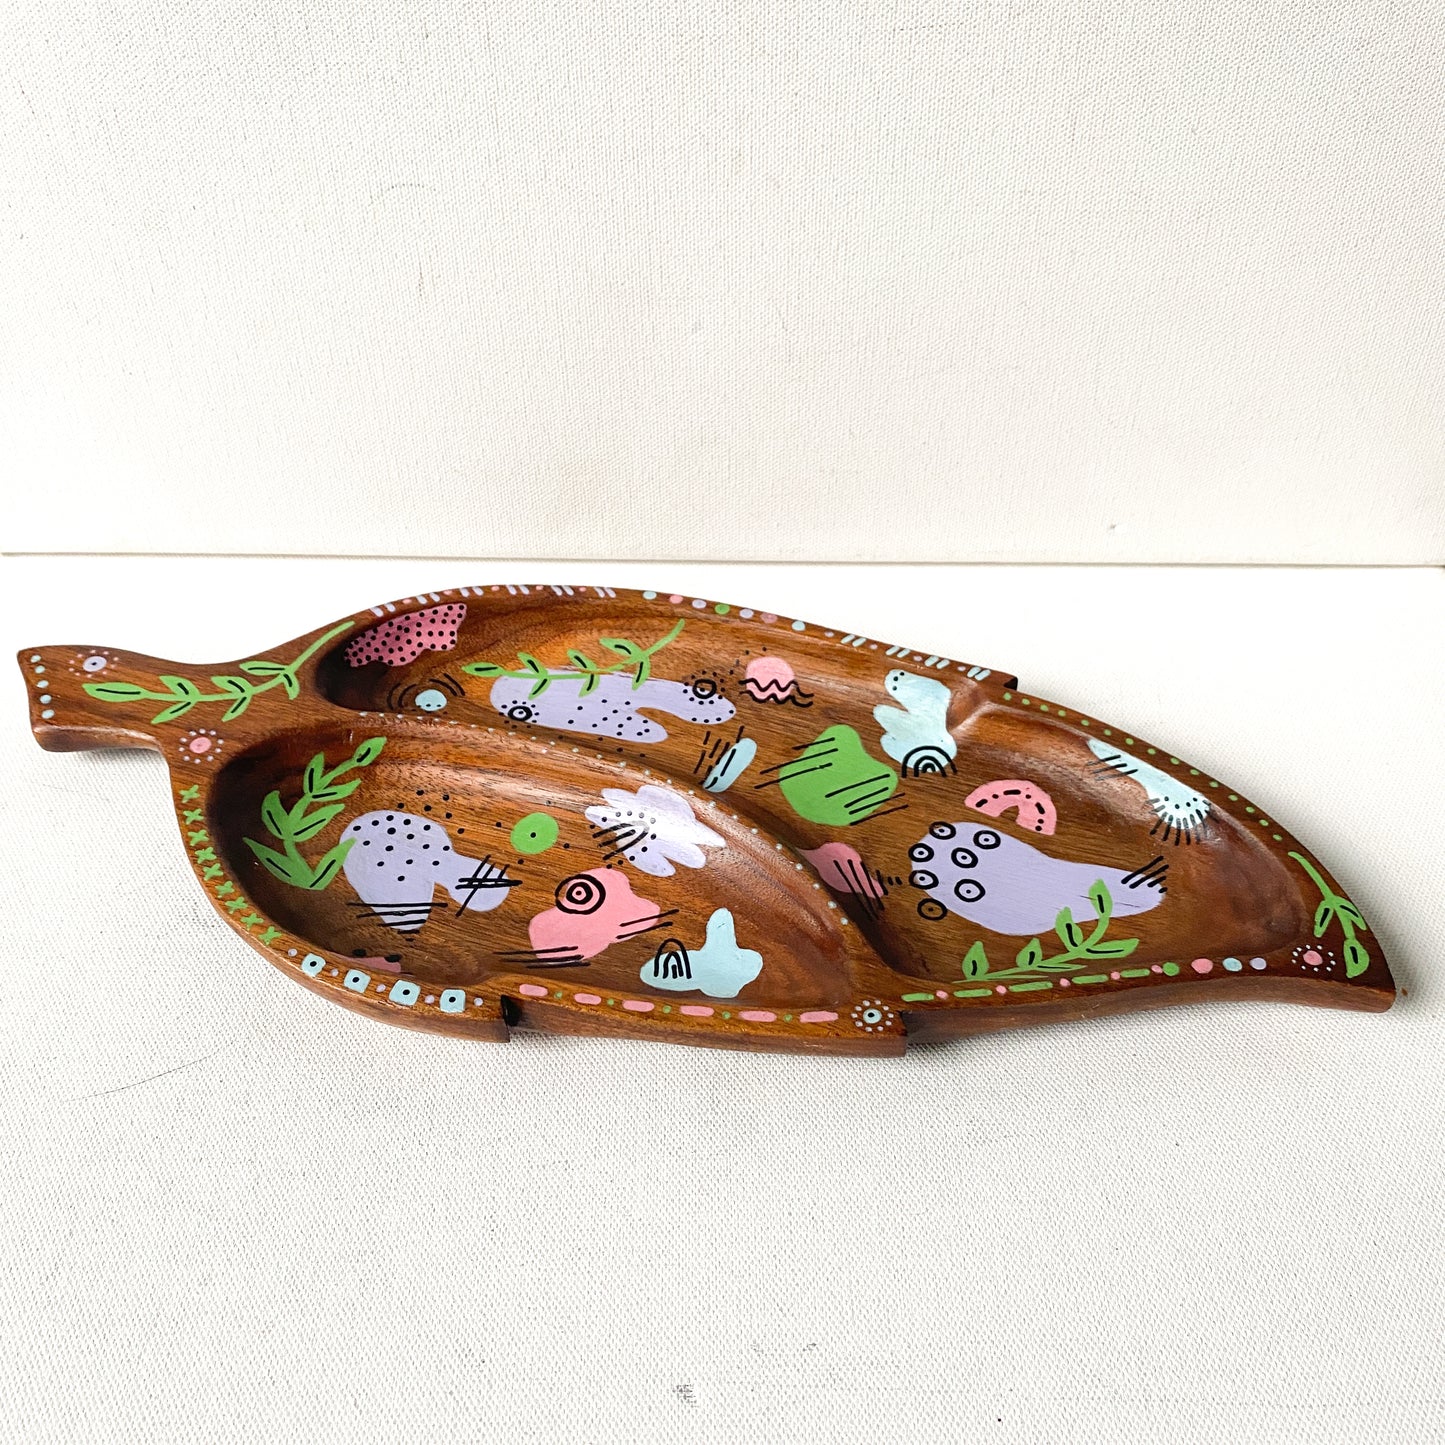 Vintage Hand Painted Monkeypod Wood Tray, Tropical style, Bohemian decor